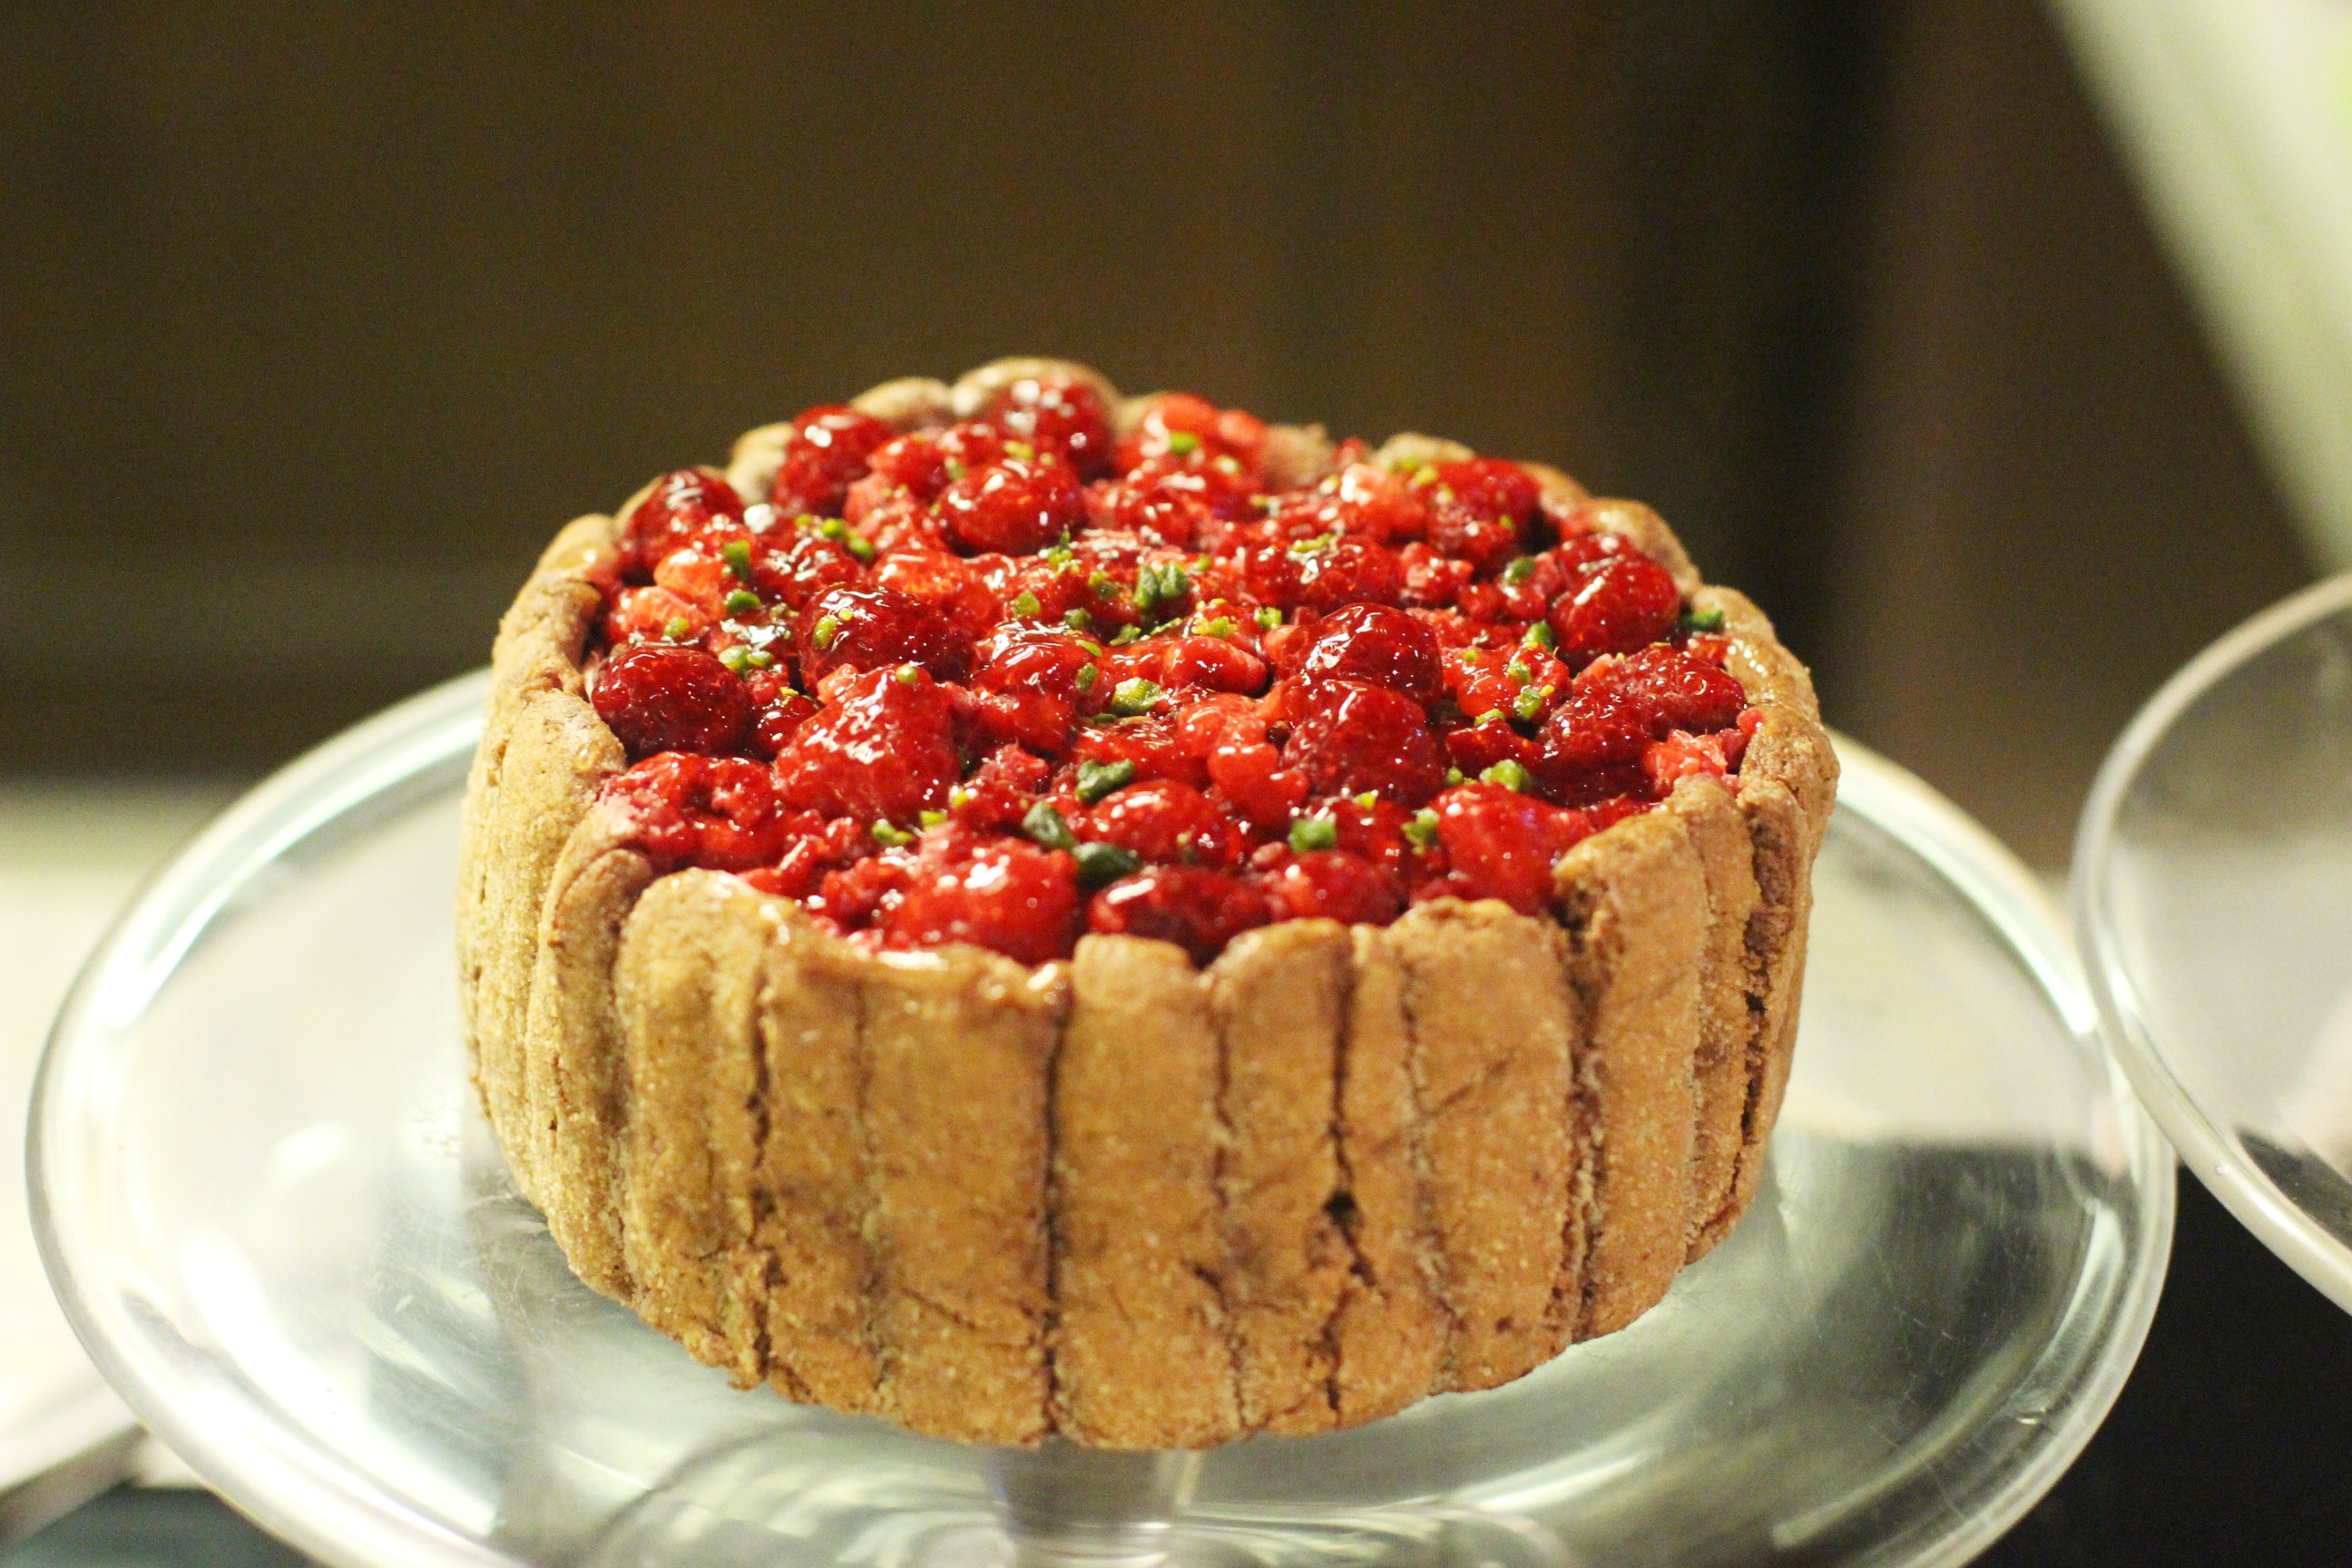 brown and red strawberry cake